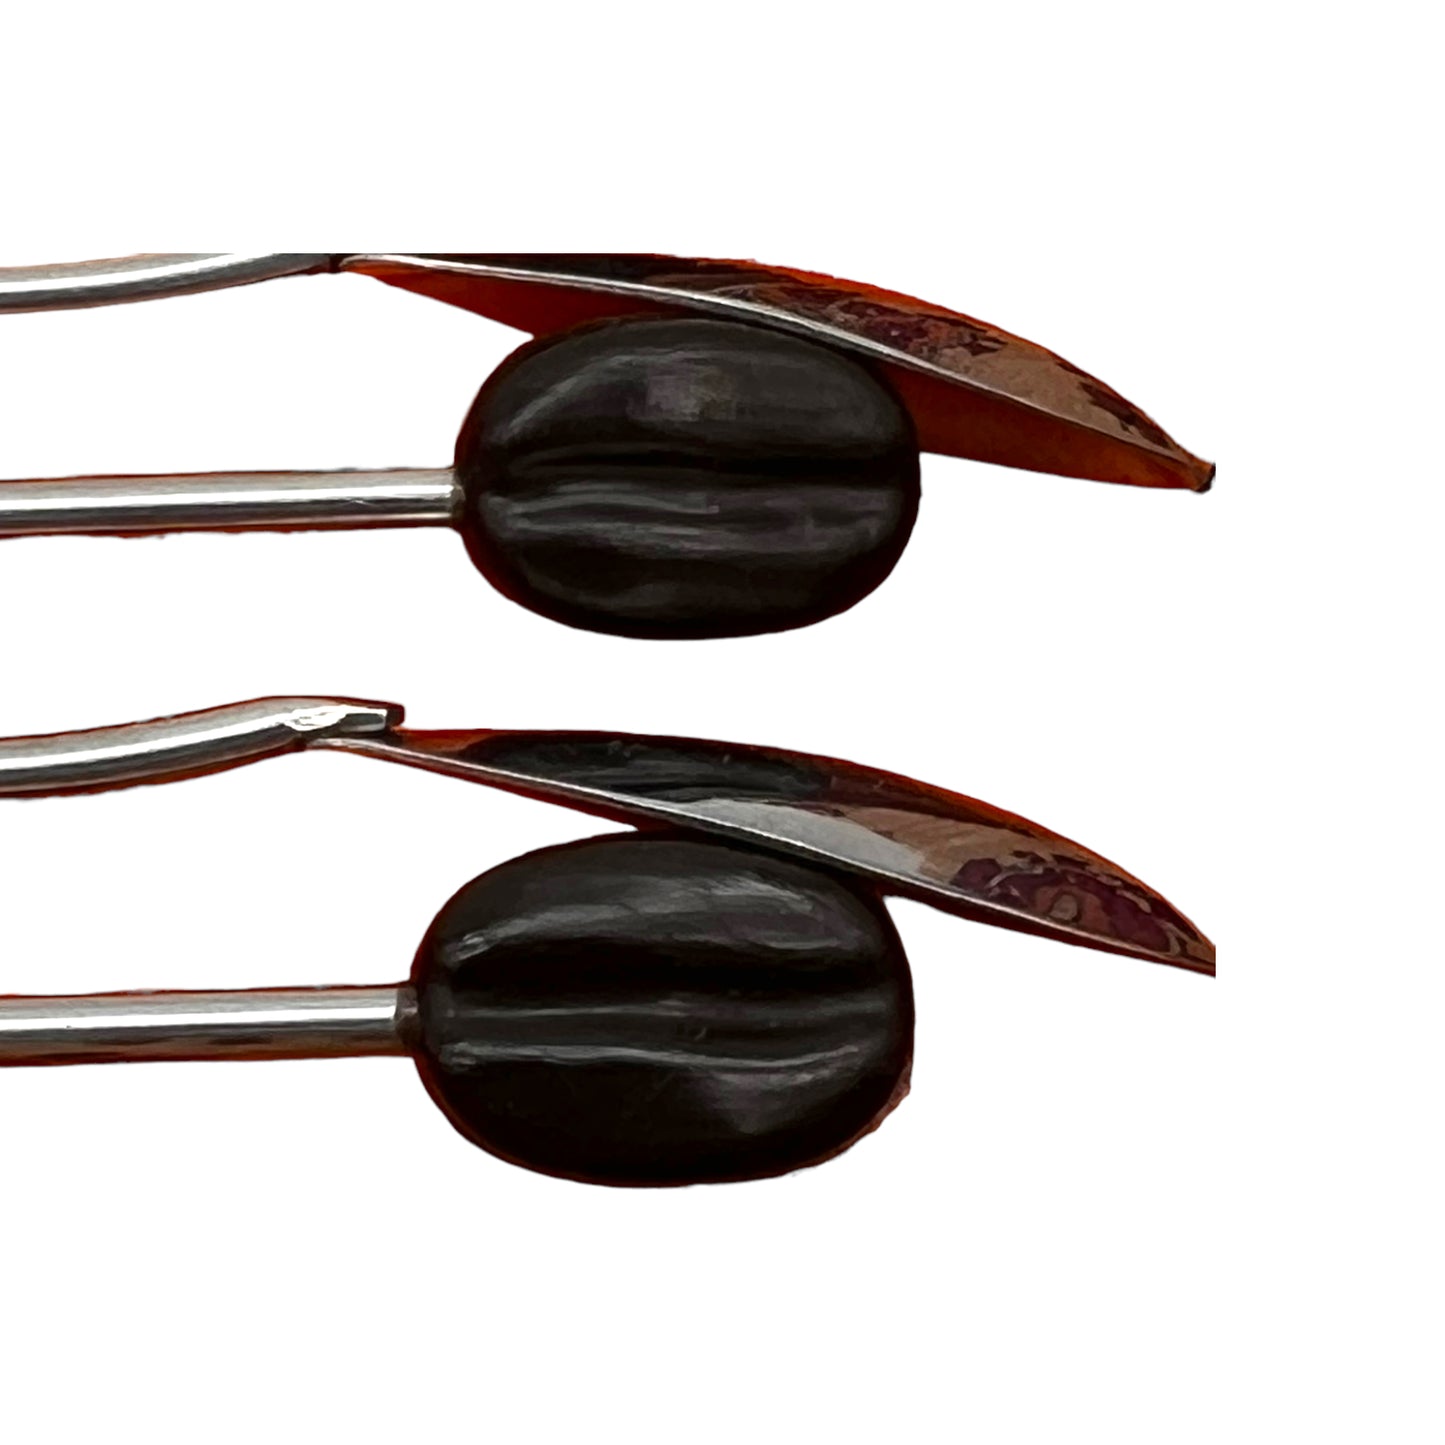 set of 6 French latte coffee spoons in a box with coffee bean tops 